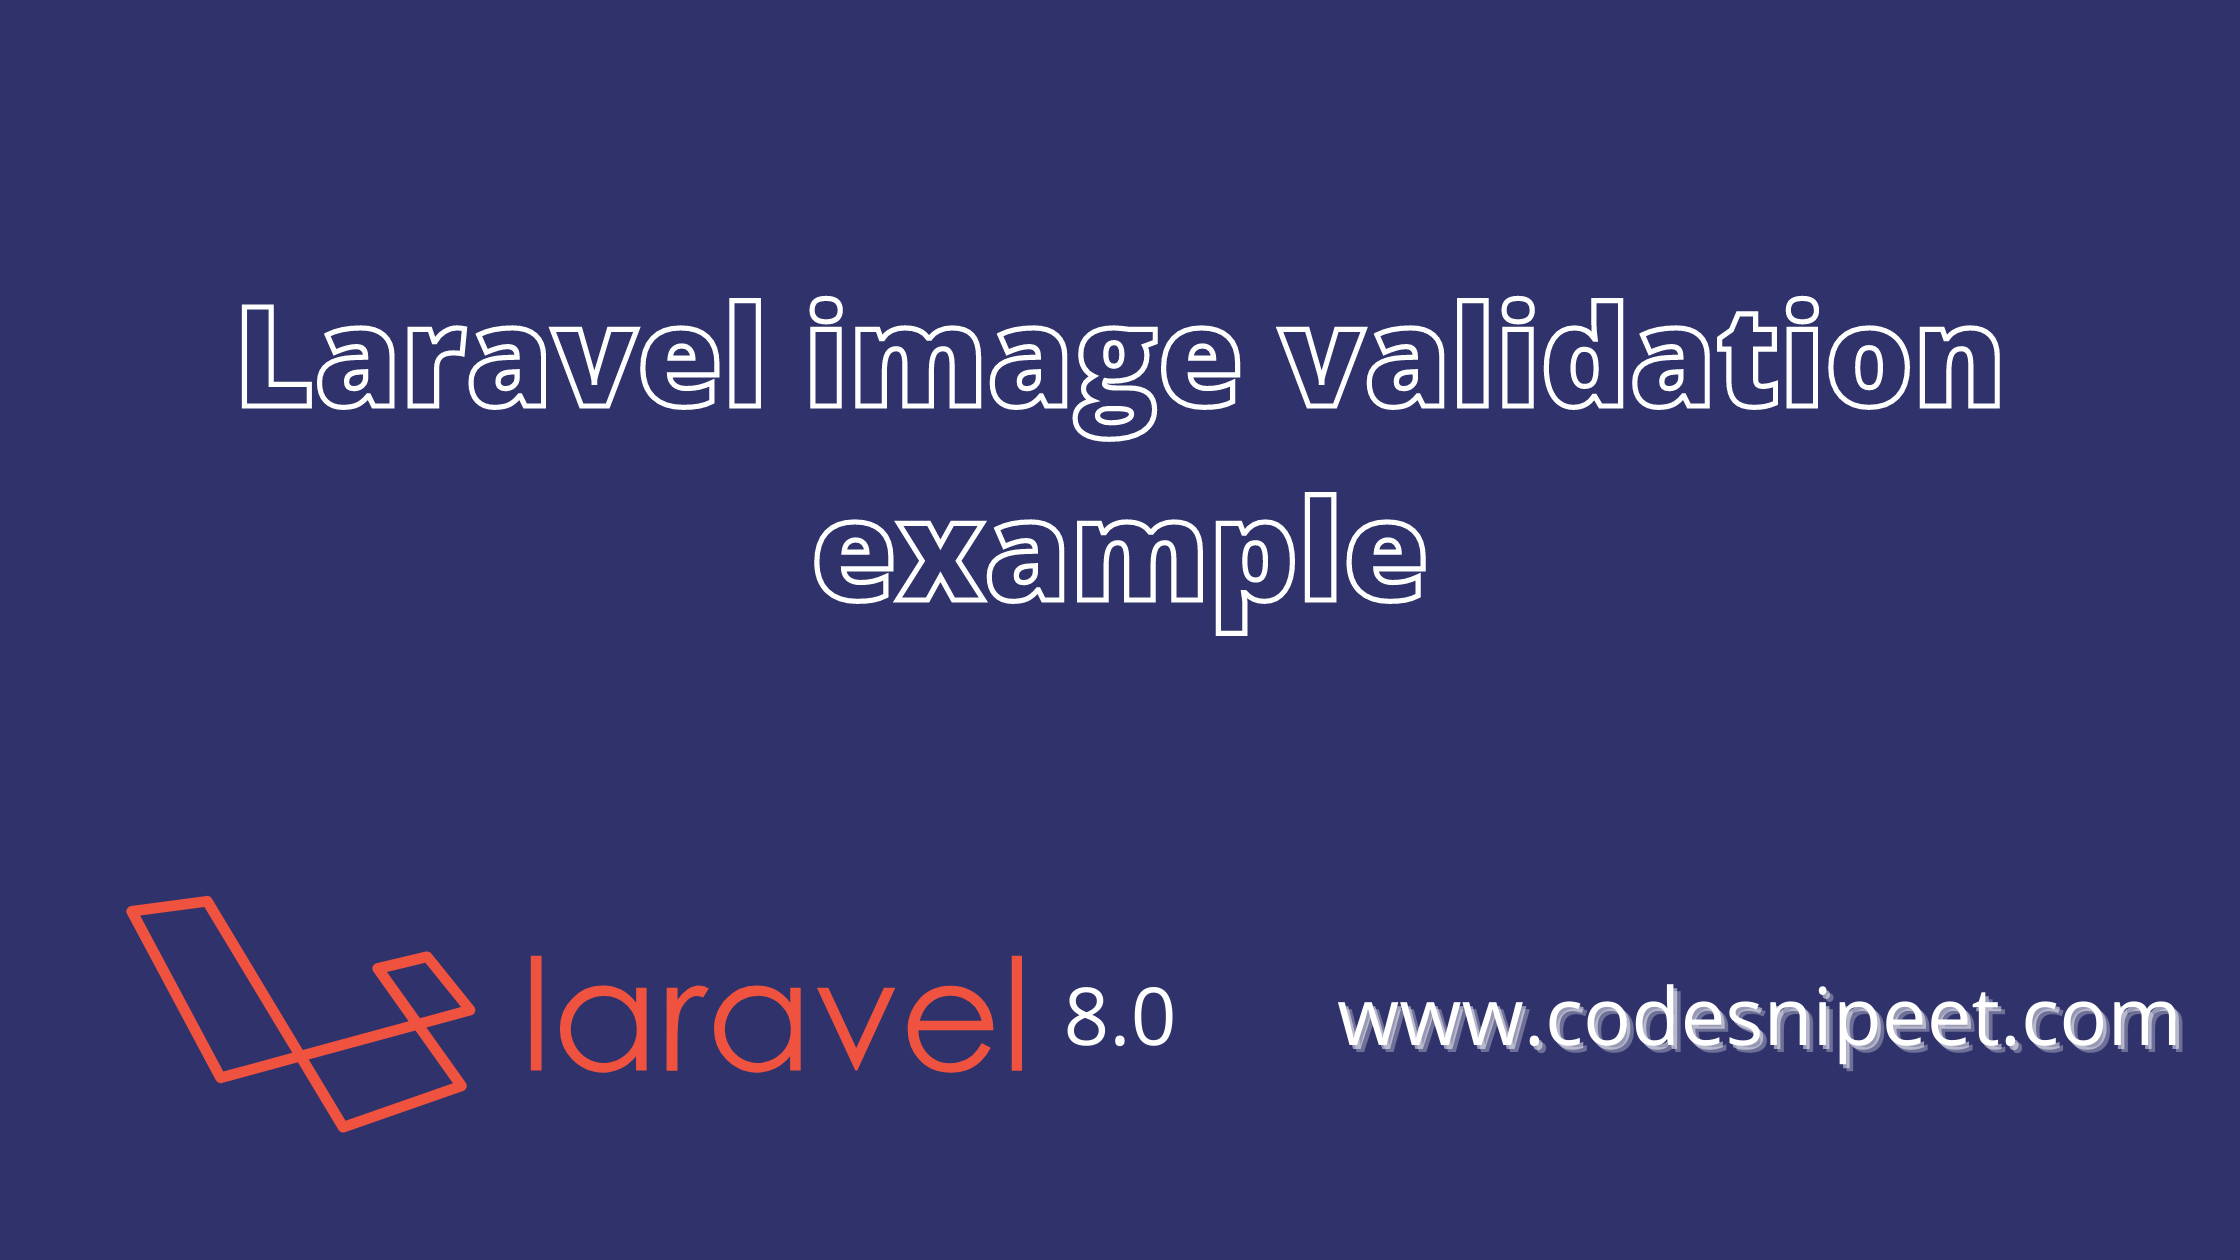 You are currently viewing Laravel image validation example